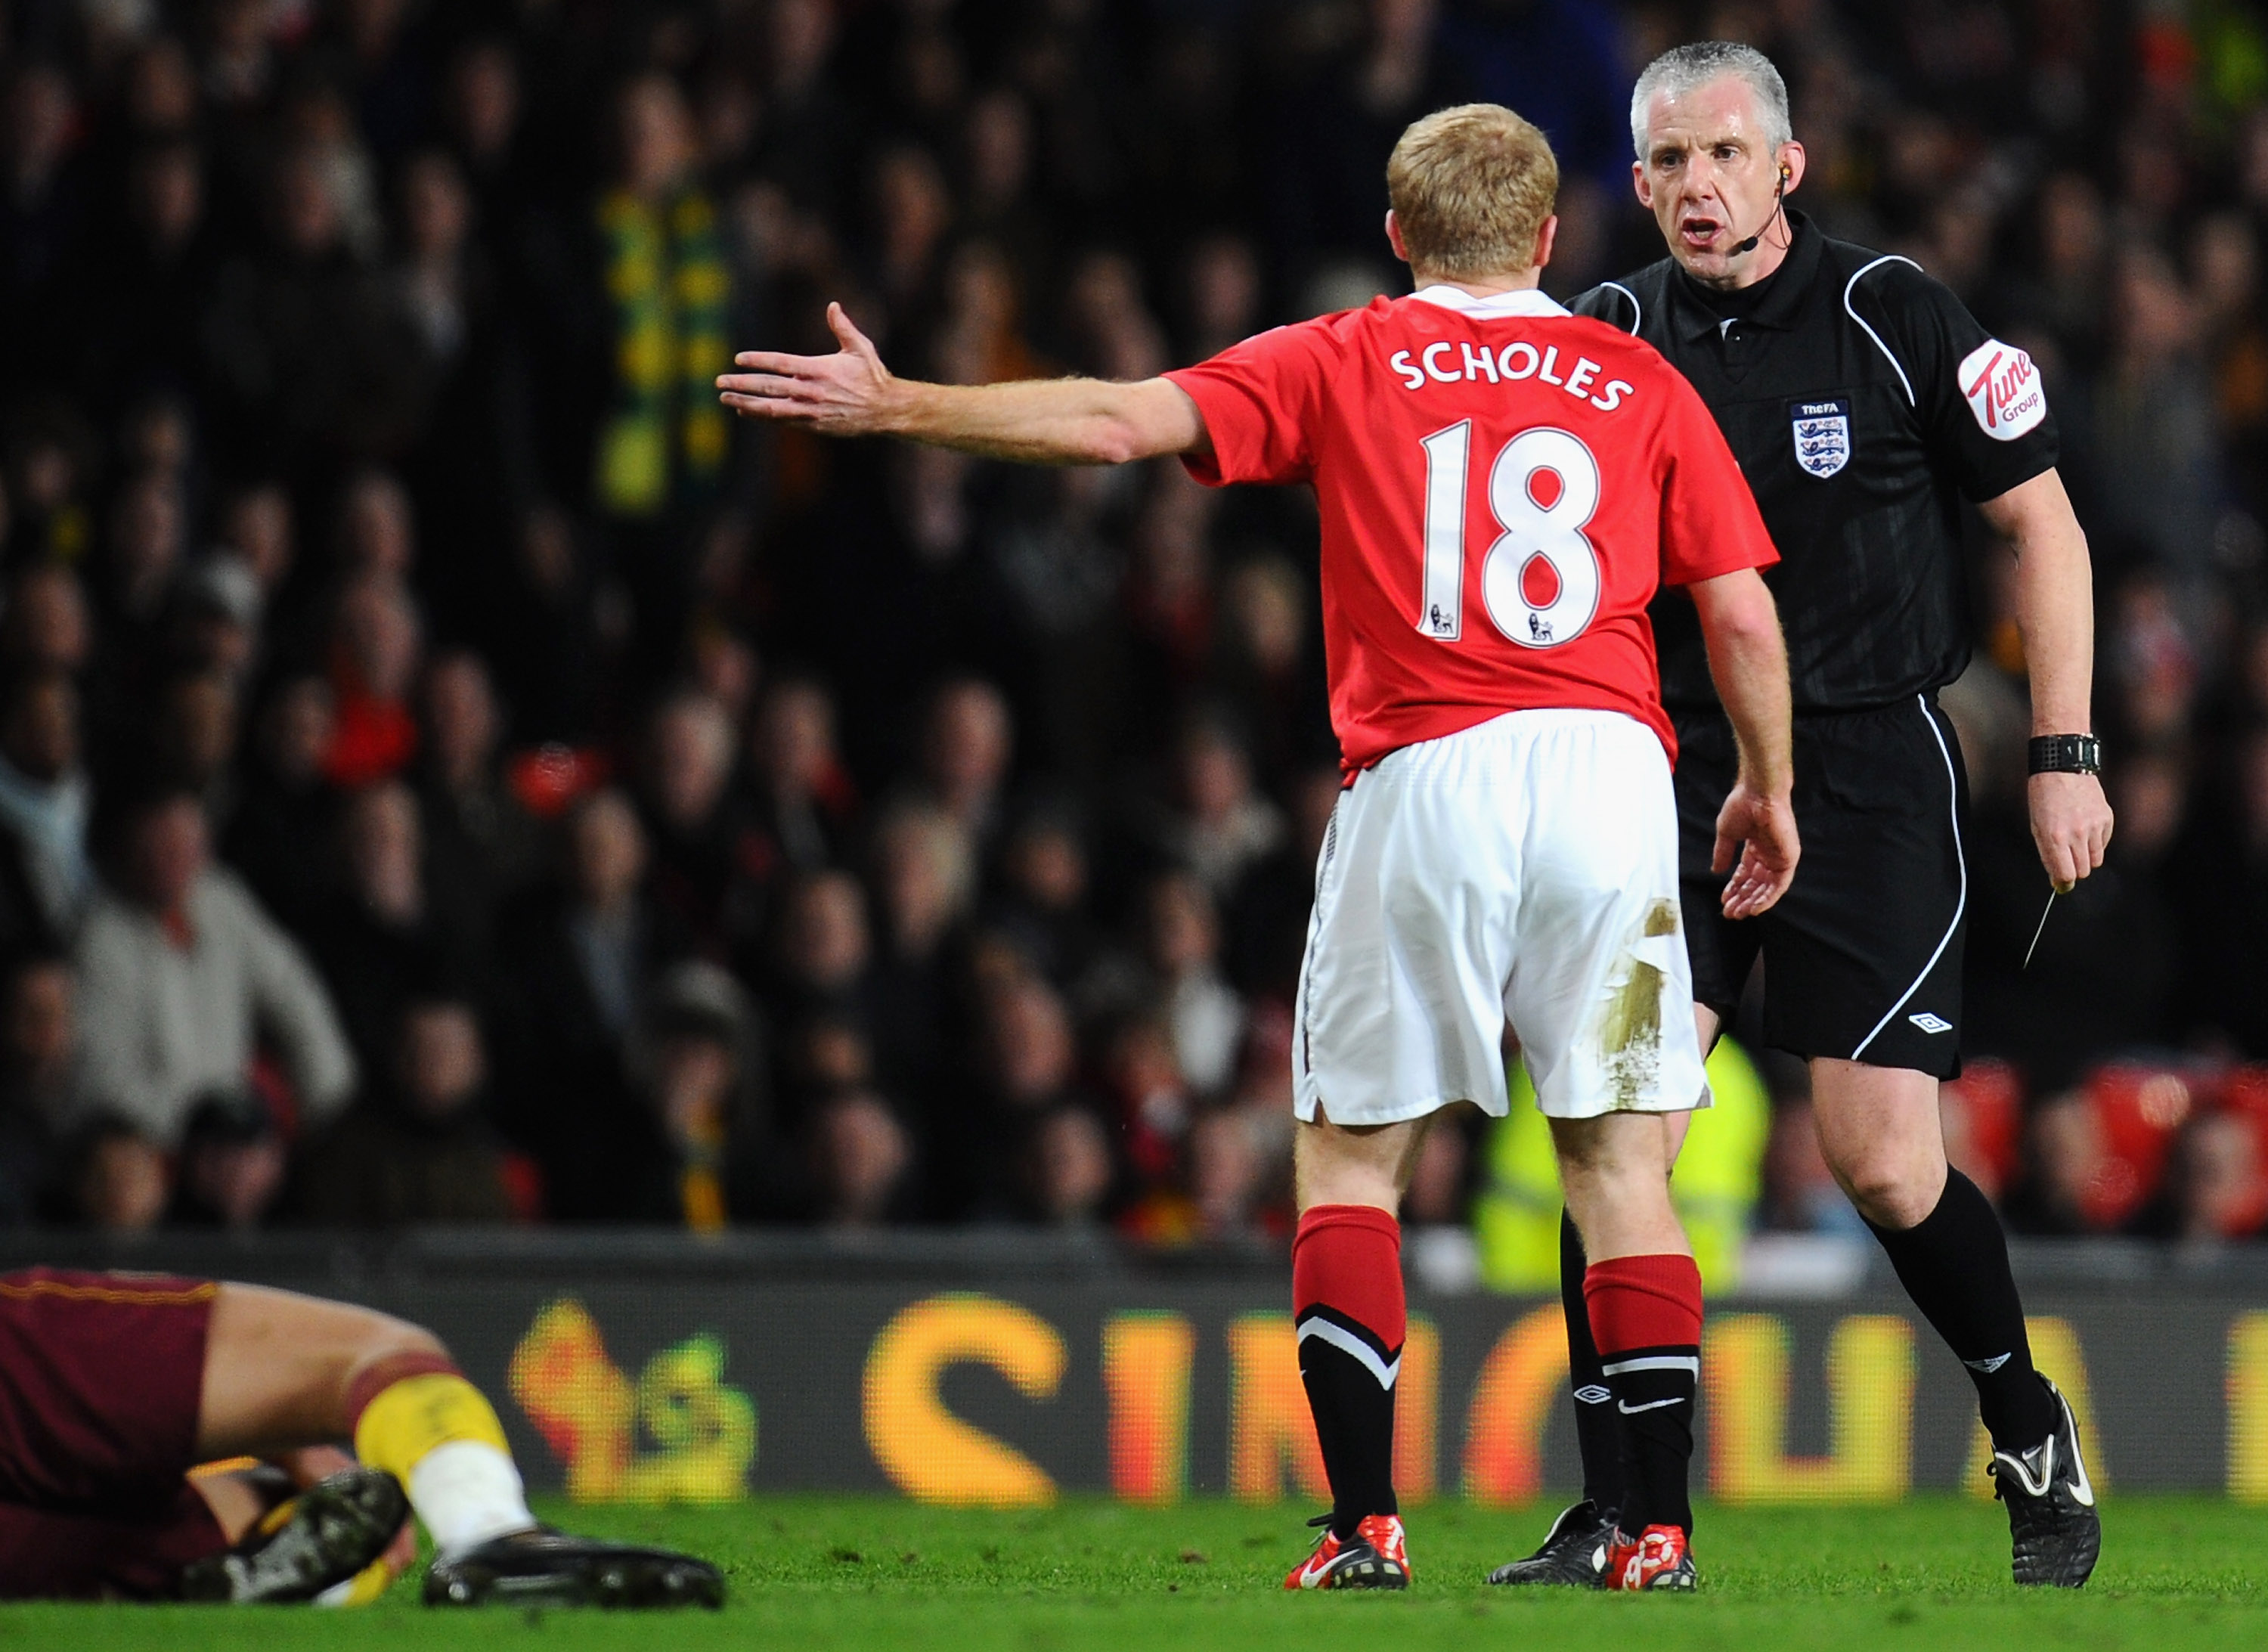 MANCHESTER, ENGLAND - MARCH 12:  Paul Scholes of Manchester United argues with referee Chris Foy during the FA Cup sponsored by E.On Sixth Round match between Manchester United and Arsenal at Old Trafford on March 12, 2011 in Manchester, England.  (Photo 